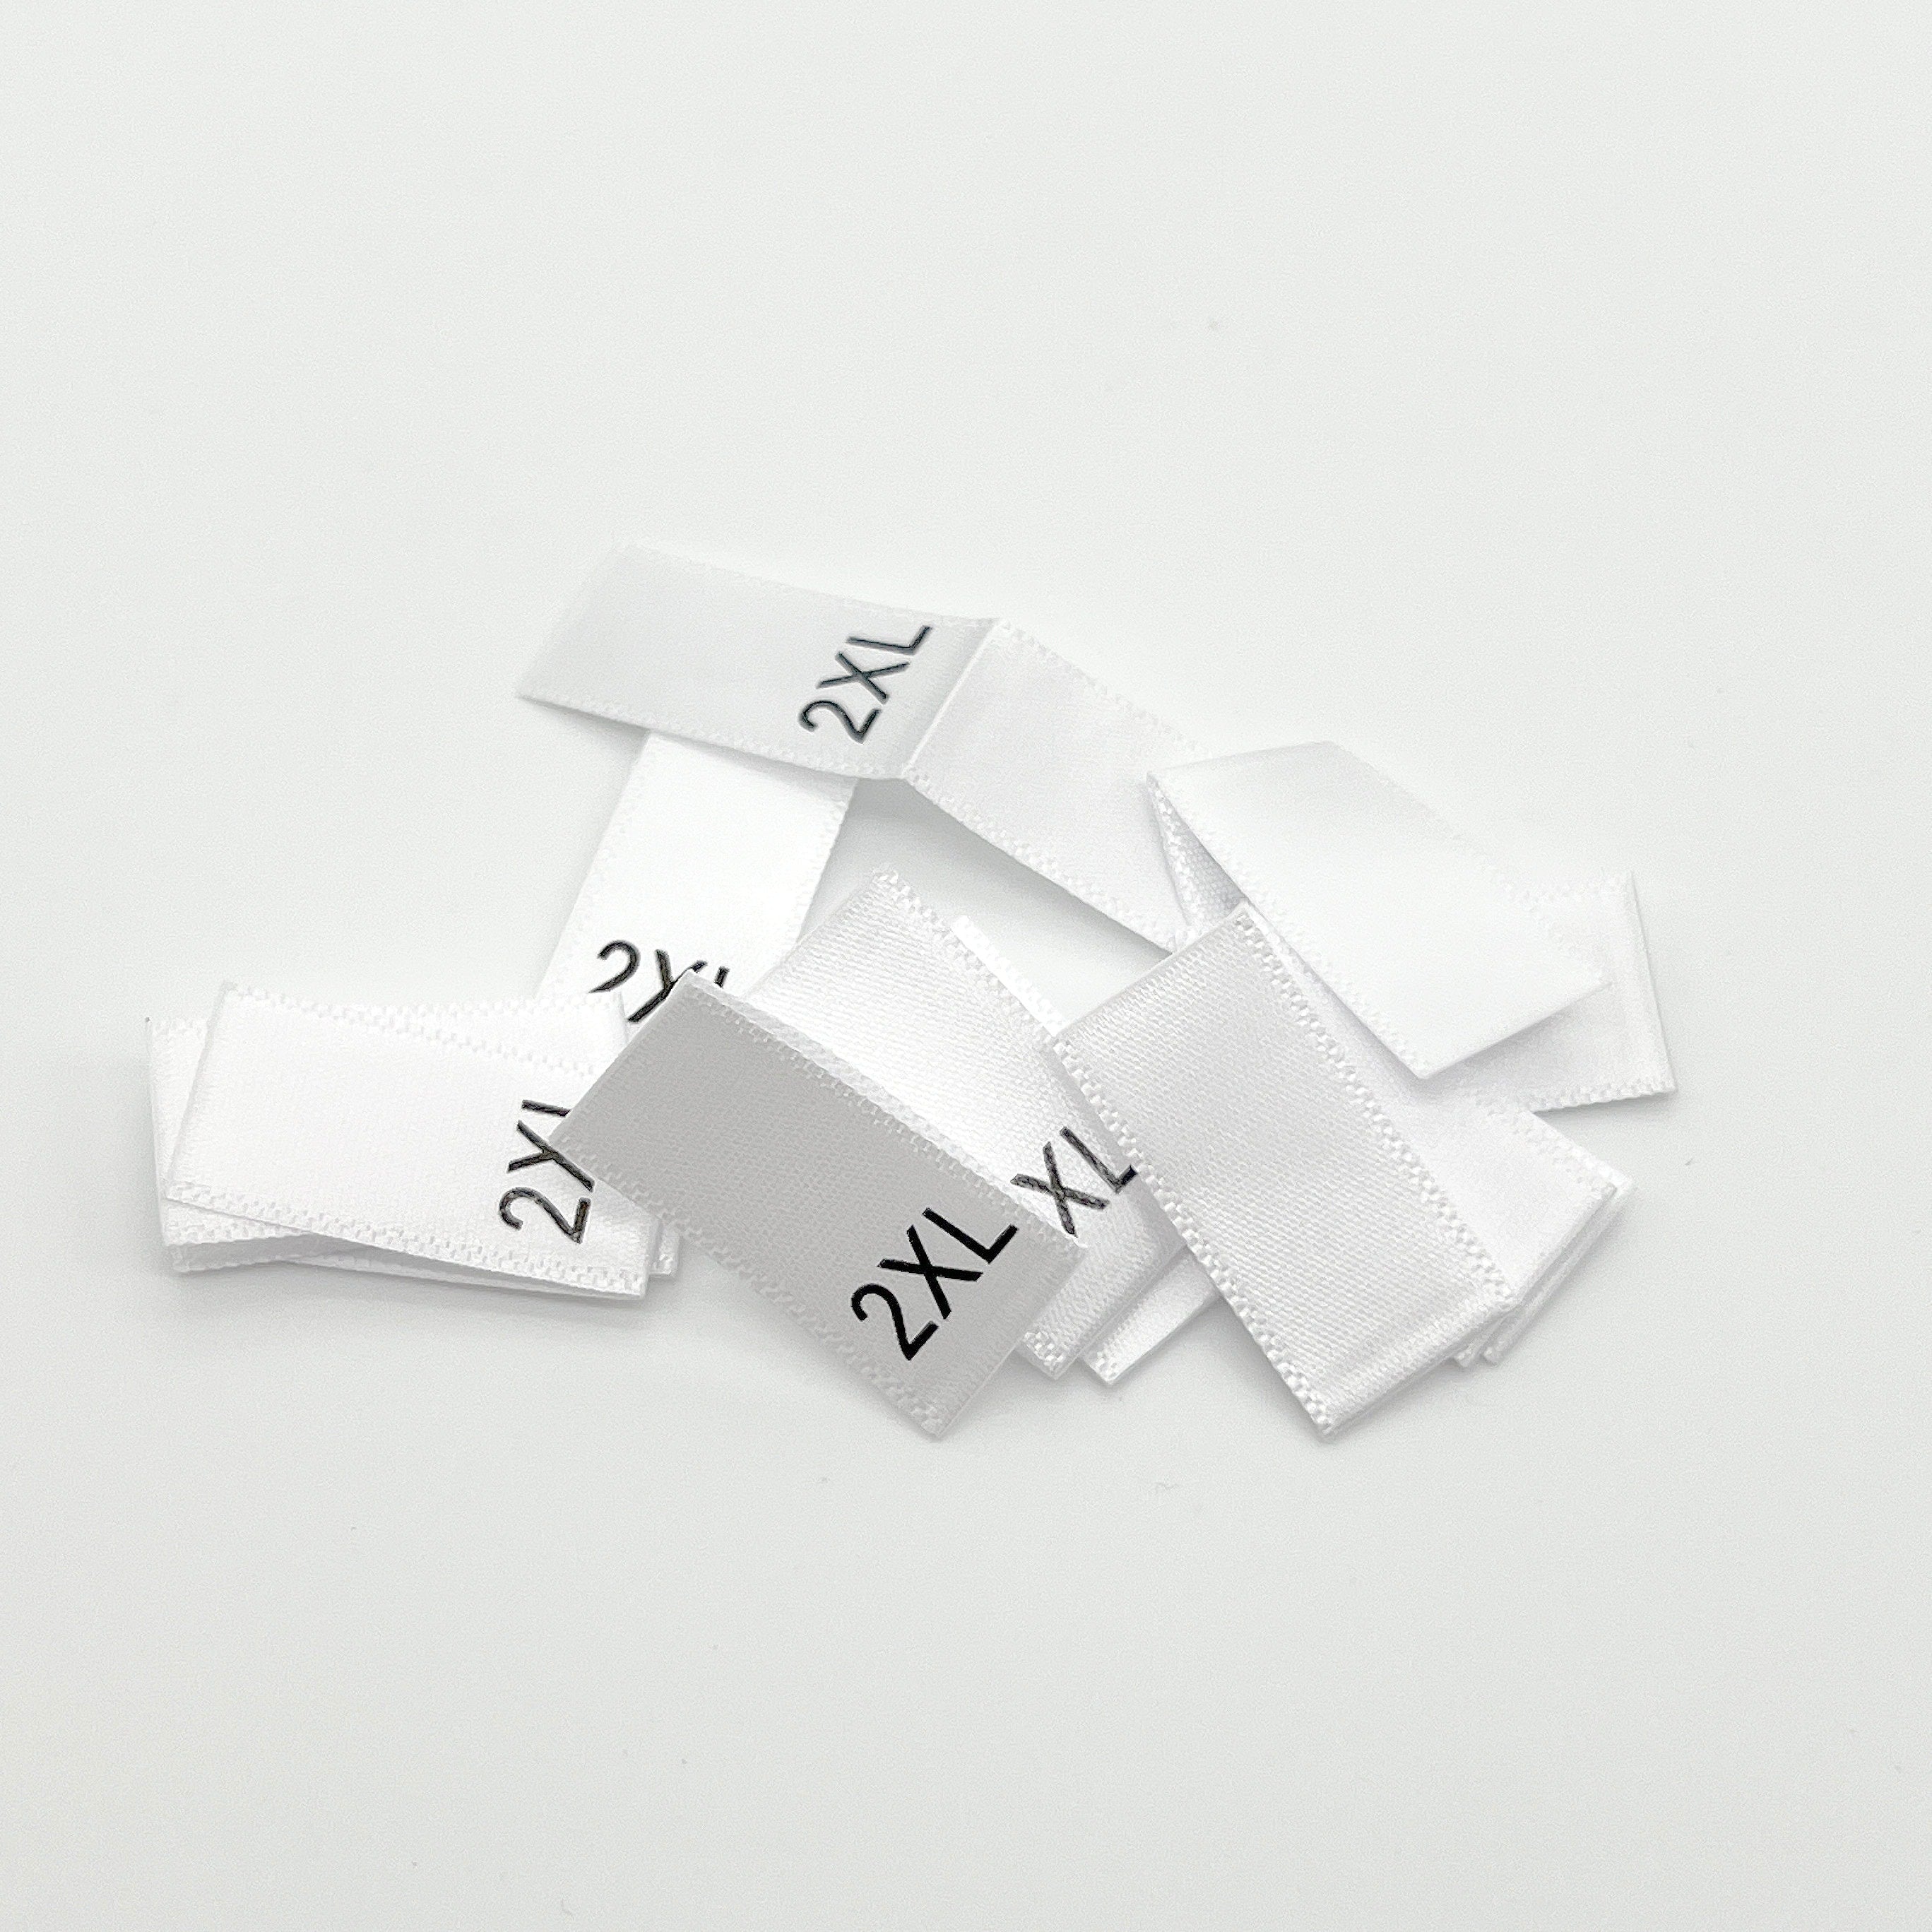 White Satin Garment Size Labels- Set of 5 of each size